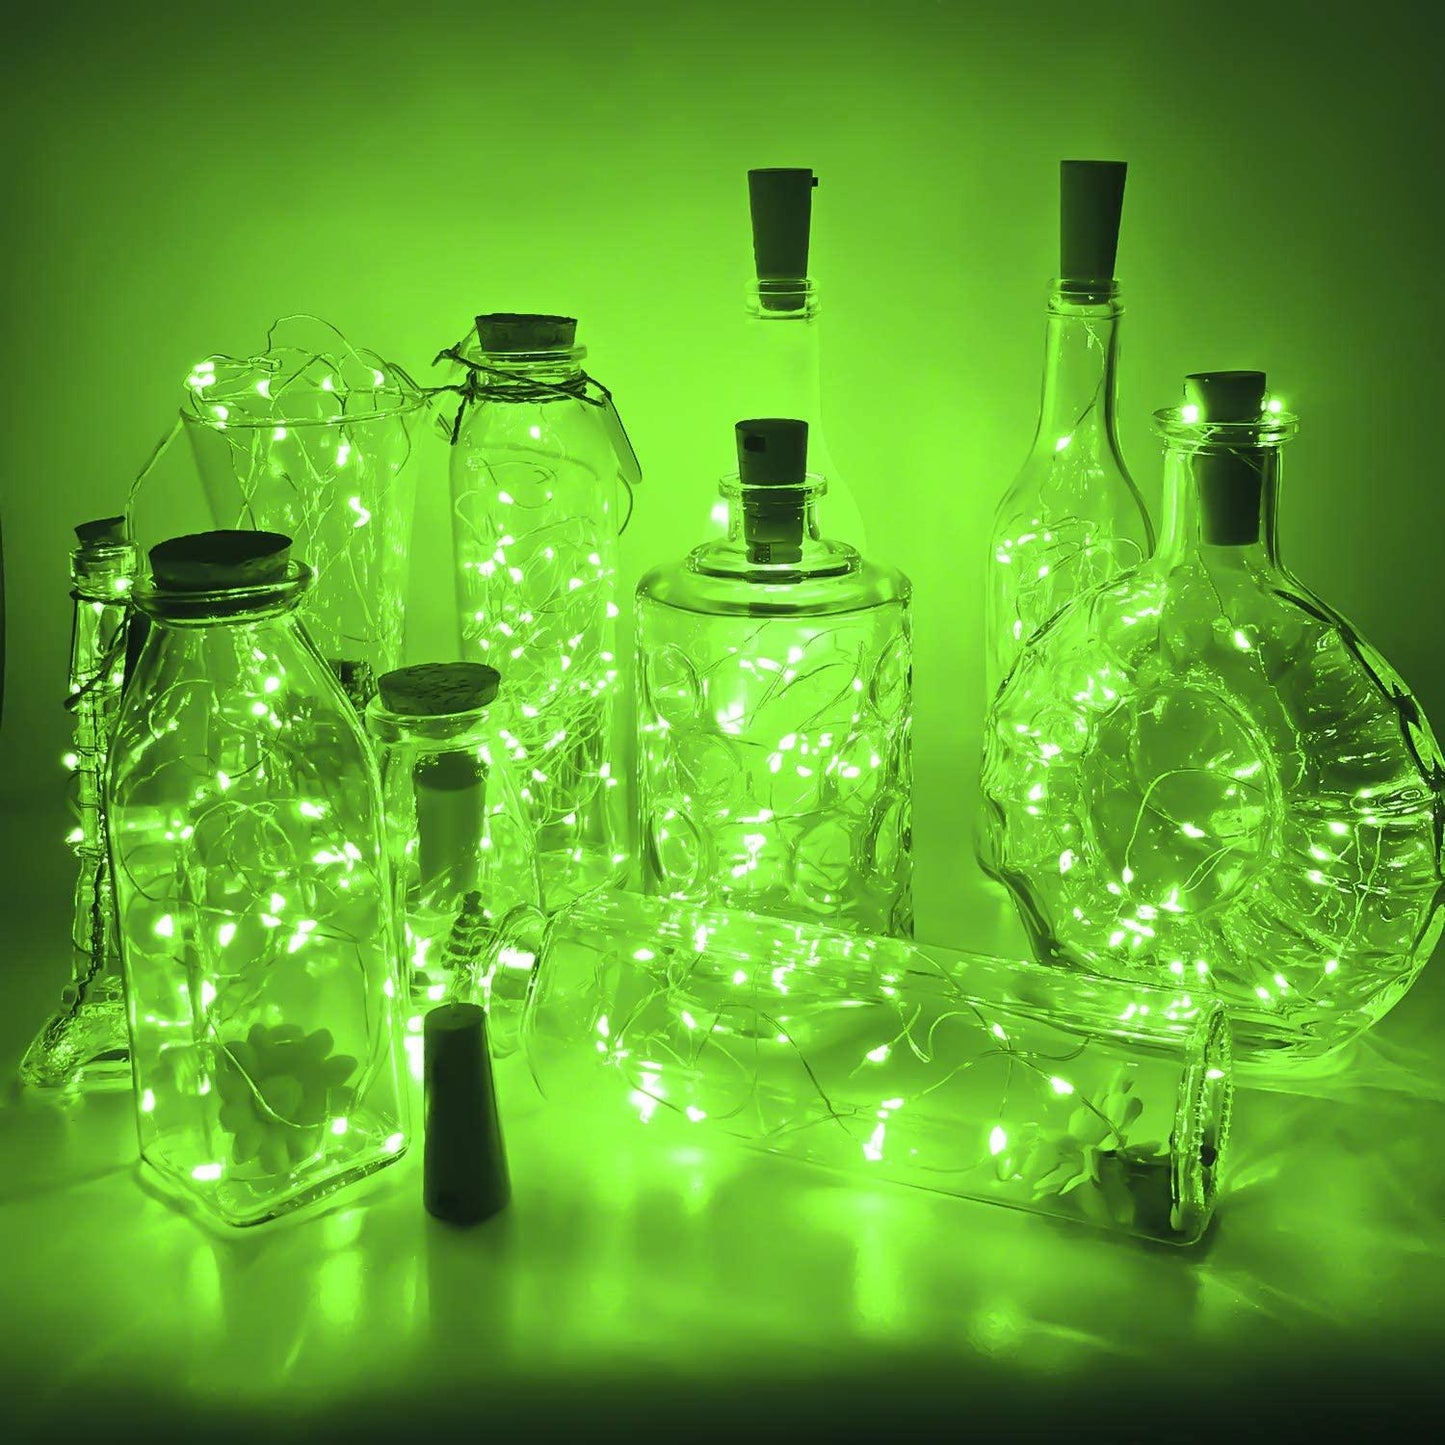 Battery Operated Cork Shape Copper Wire Lights Bottles Crafts Party Decorations - If you say i do